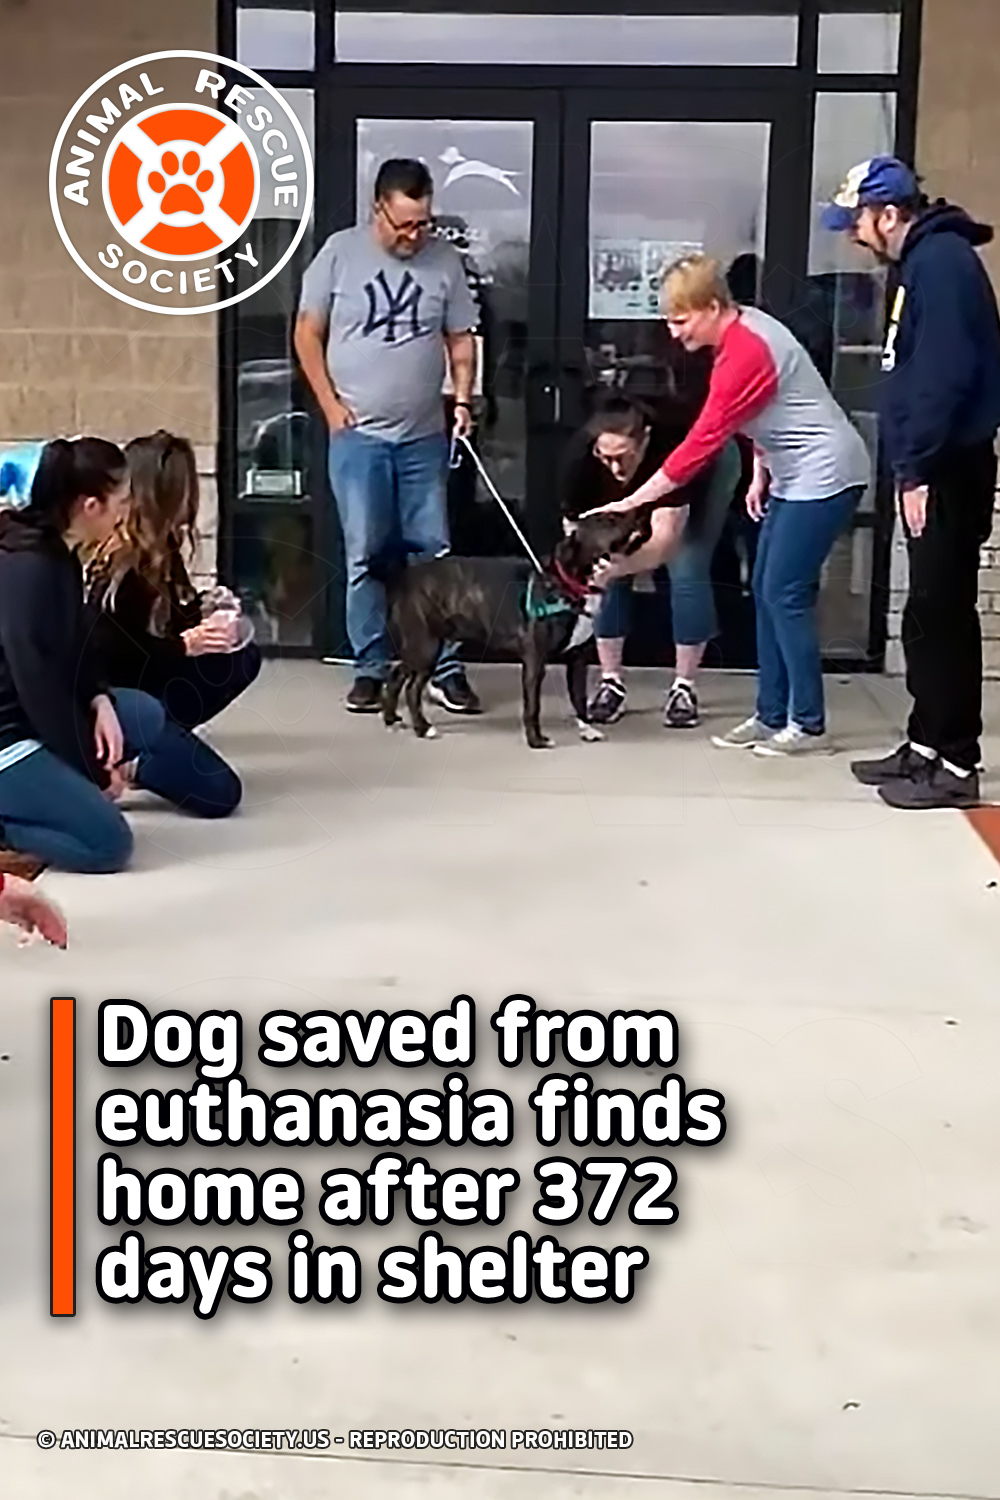 Dog saved from euthanasia finds home after 372 days in shelter